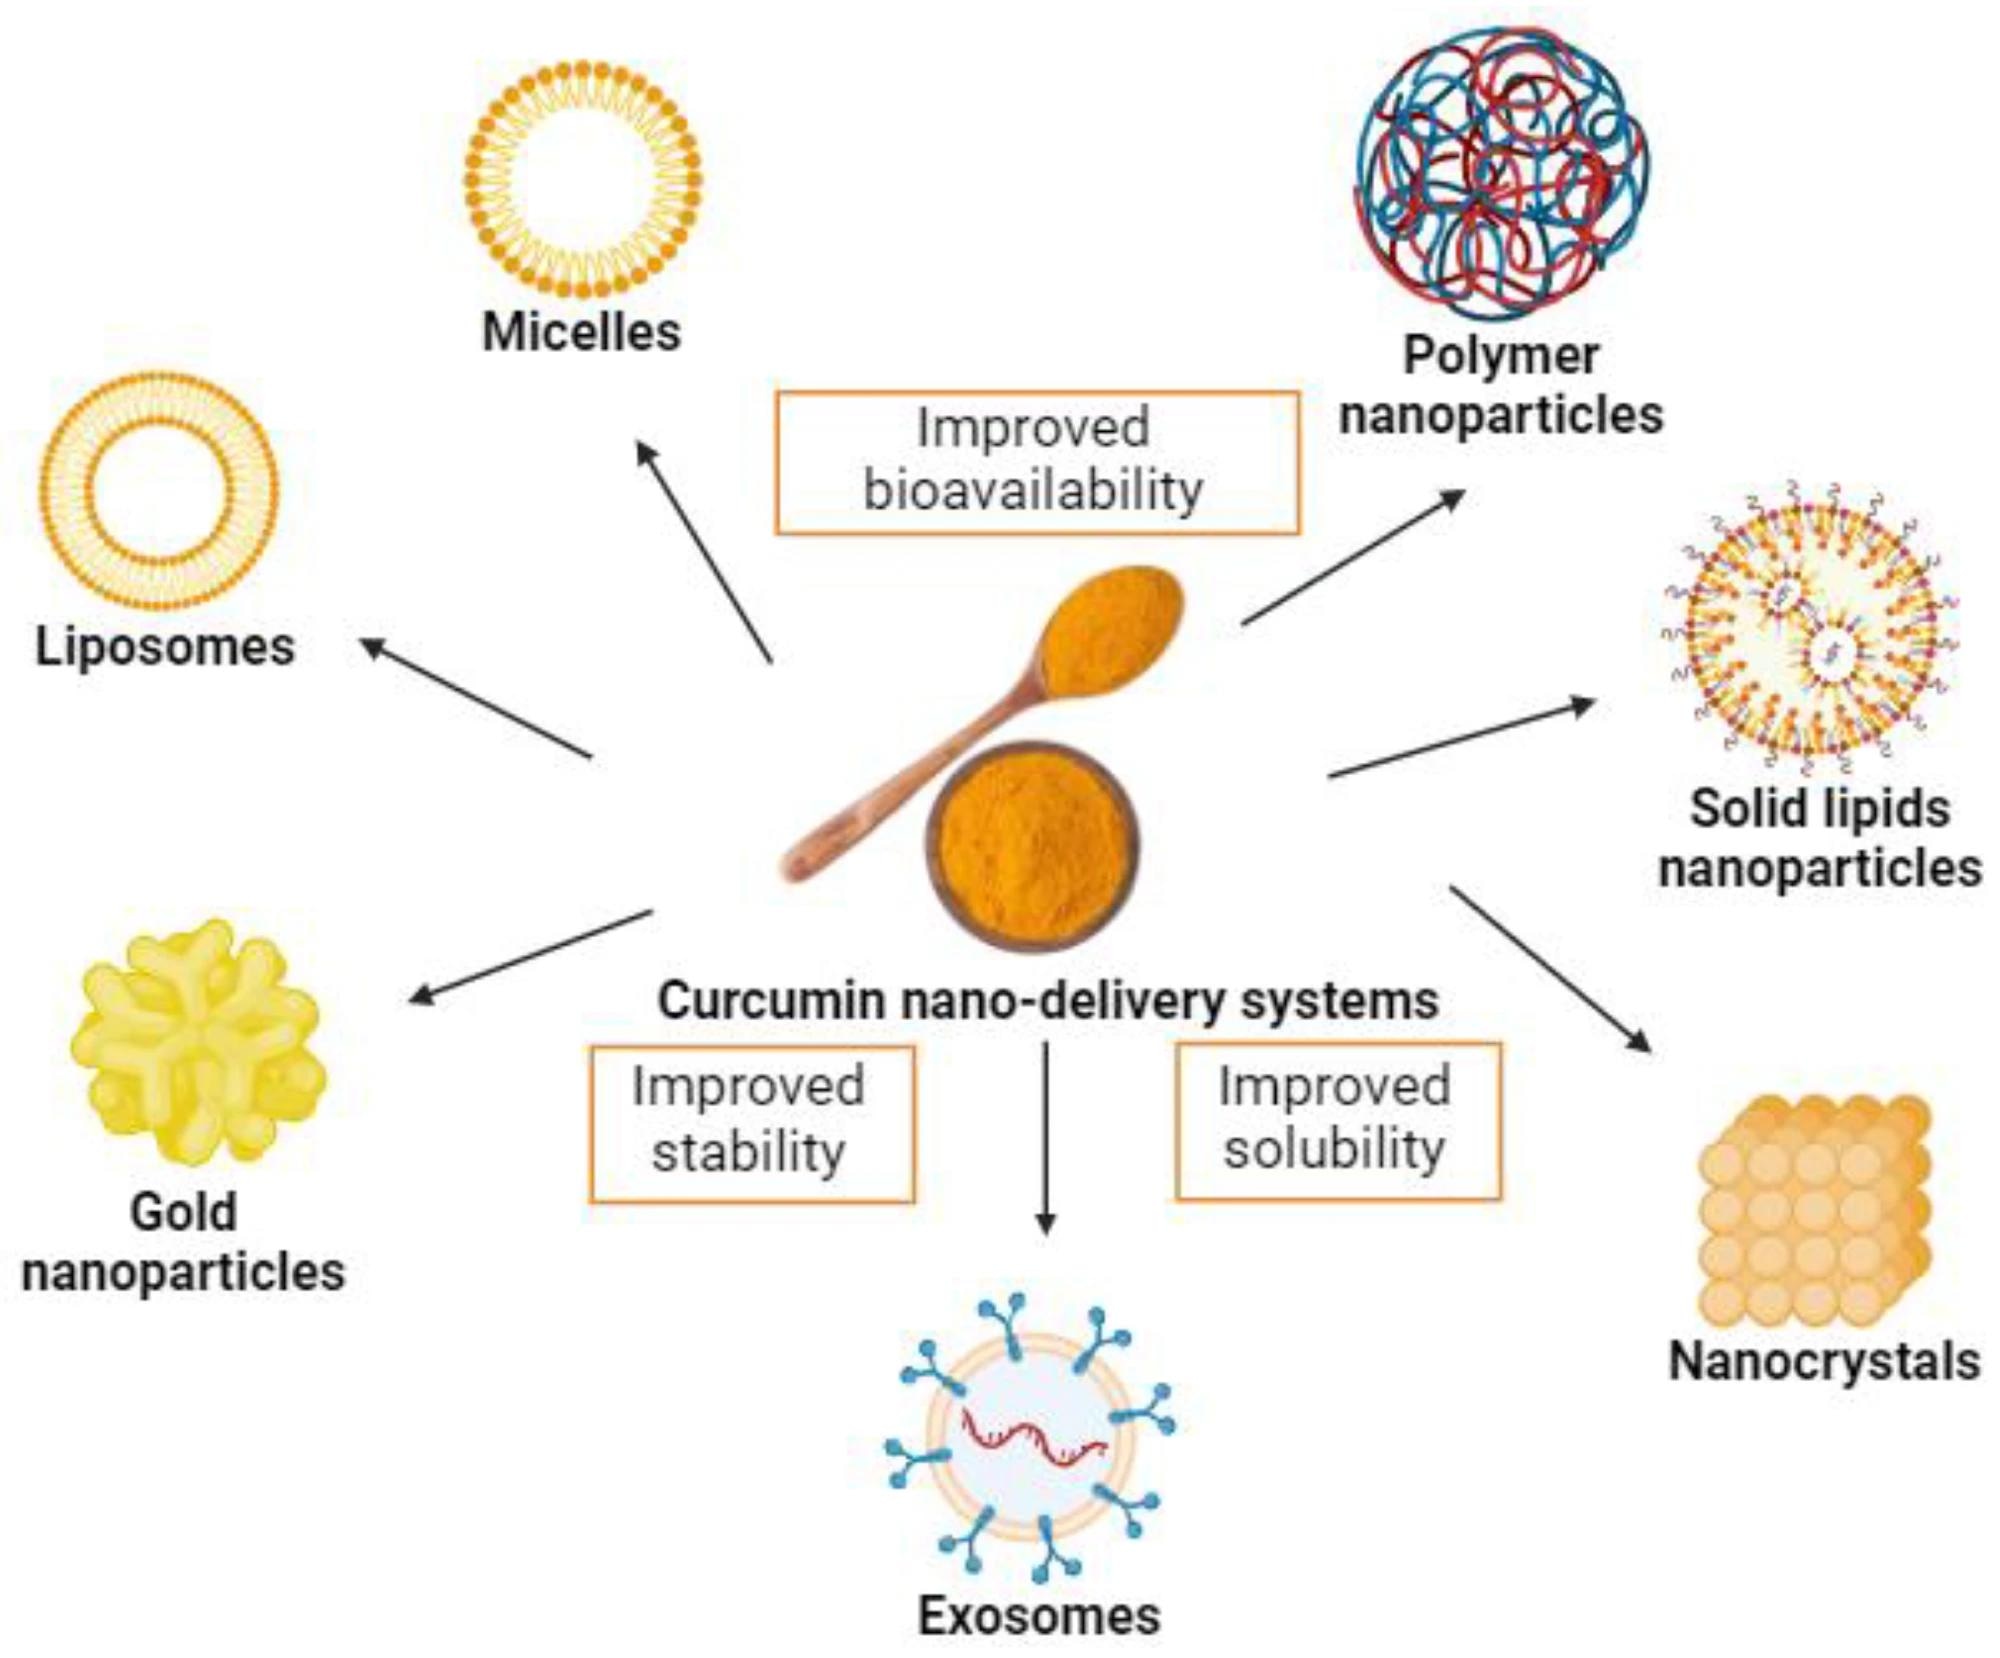 Examples of curcumin nano-delivery systems.